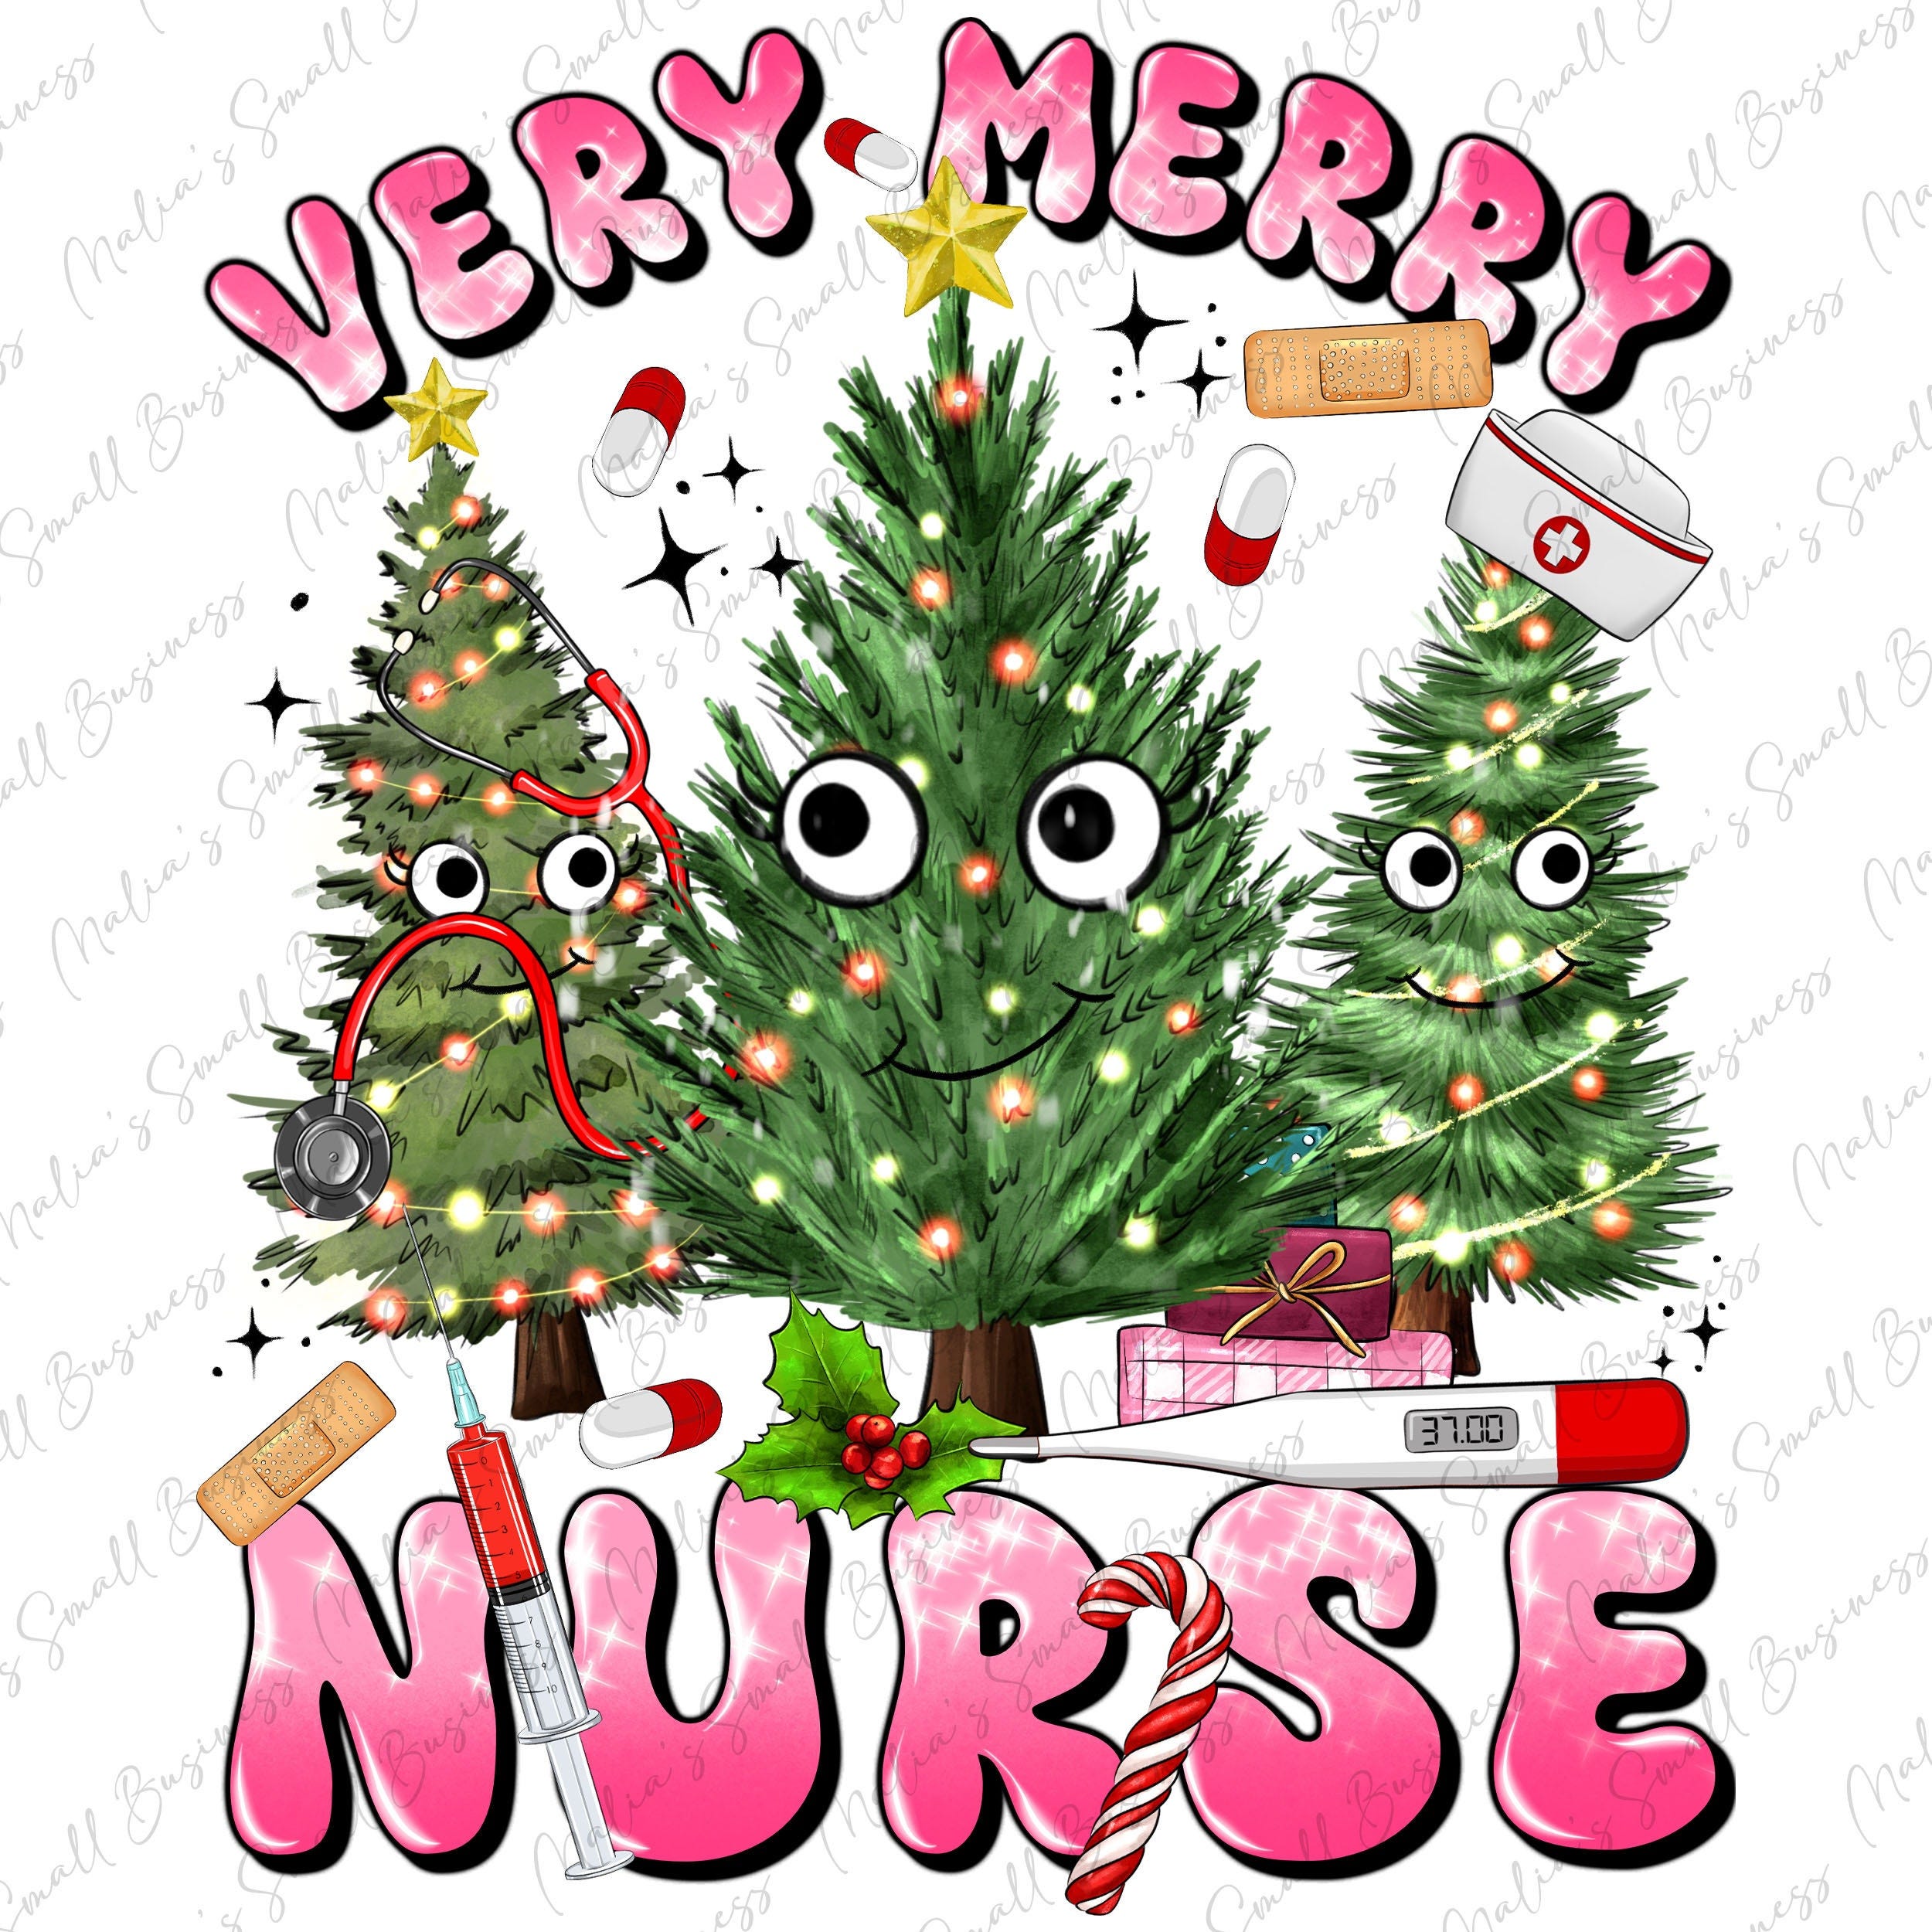 Very merry Nurse png sublimation design download, Christmas png, Nurse png, Happy New Year png, sublimate designs download